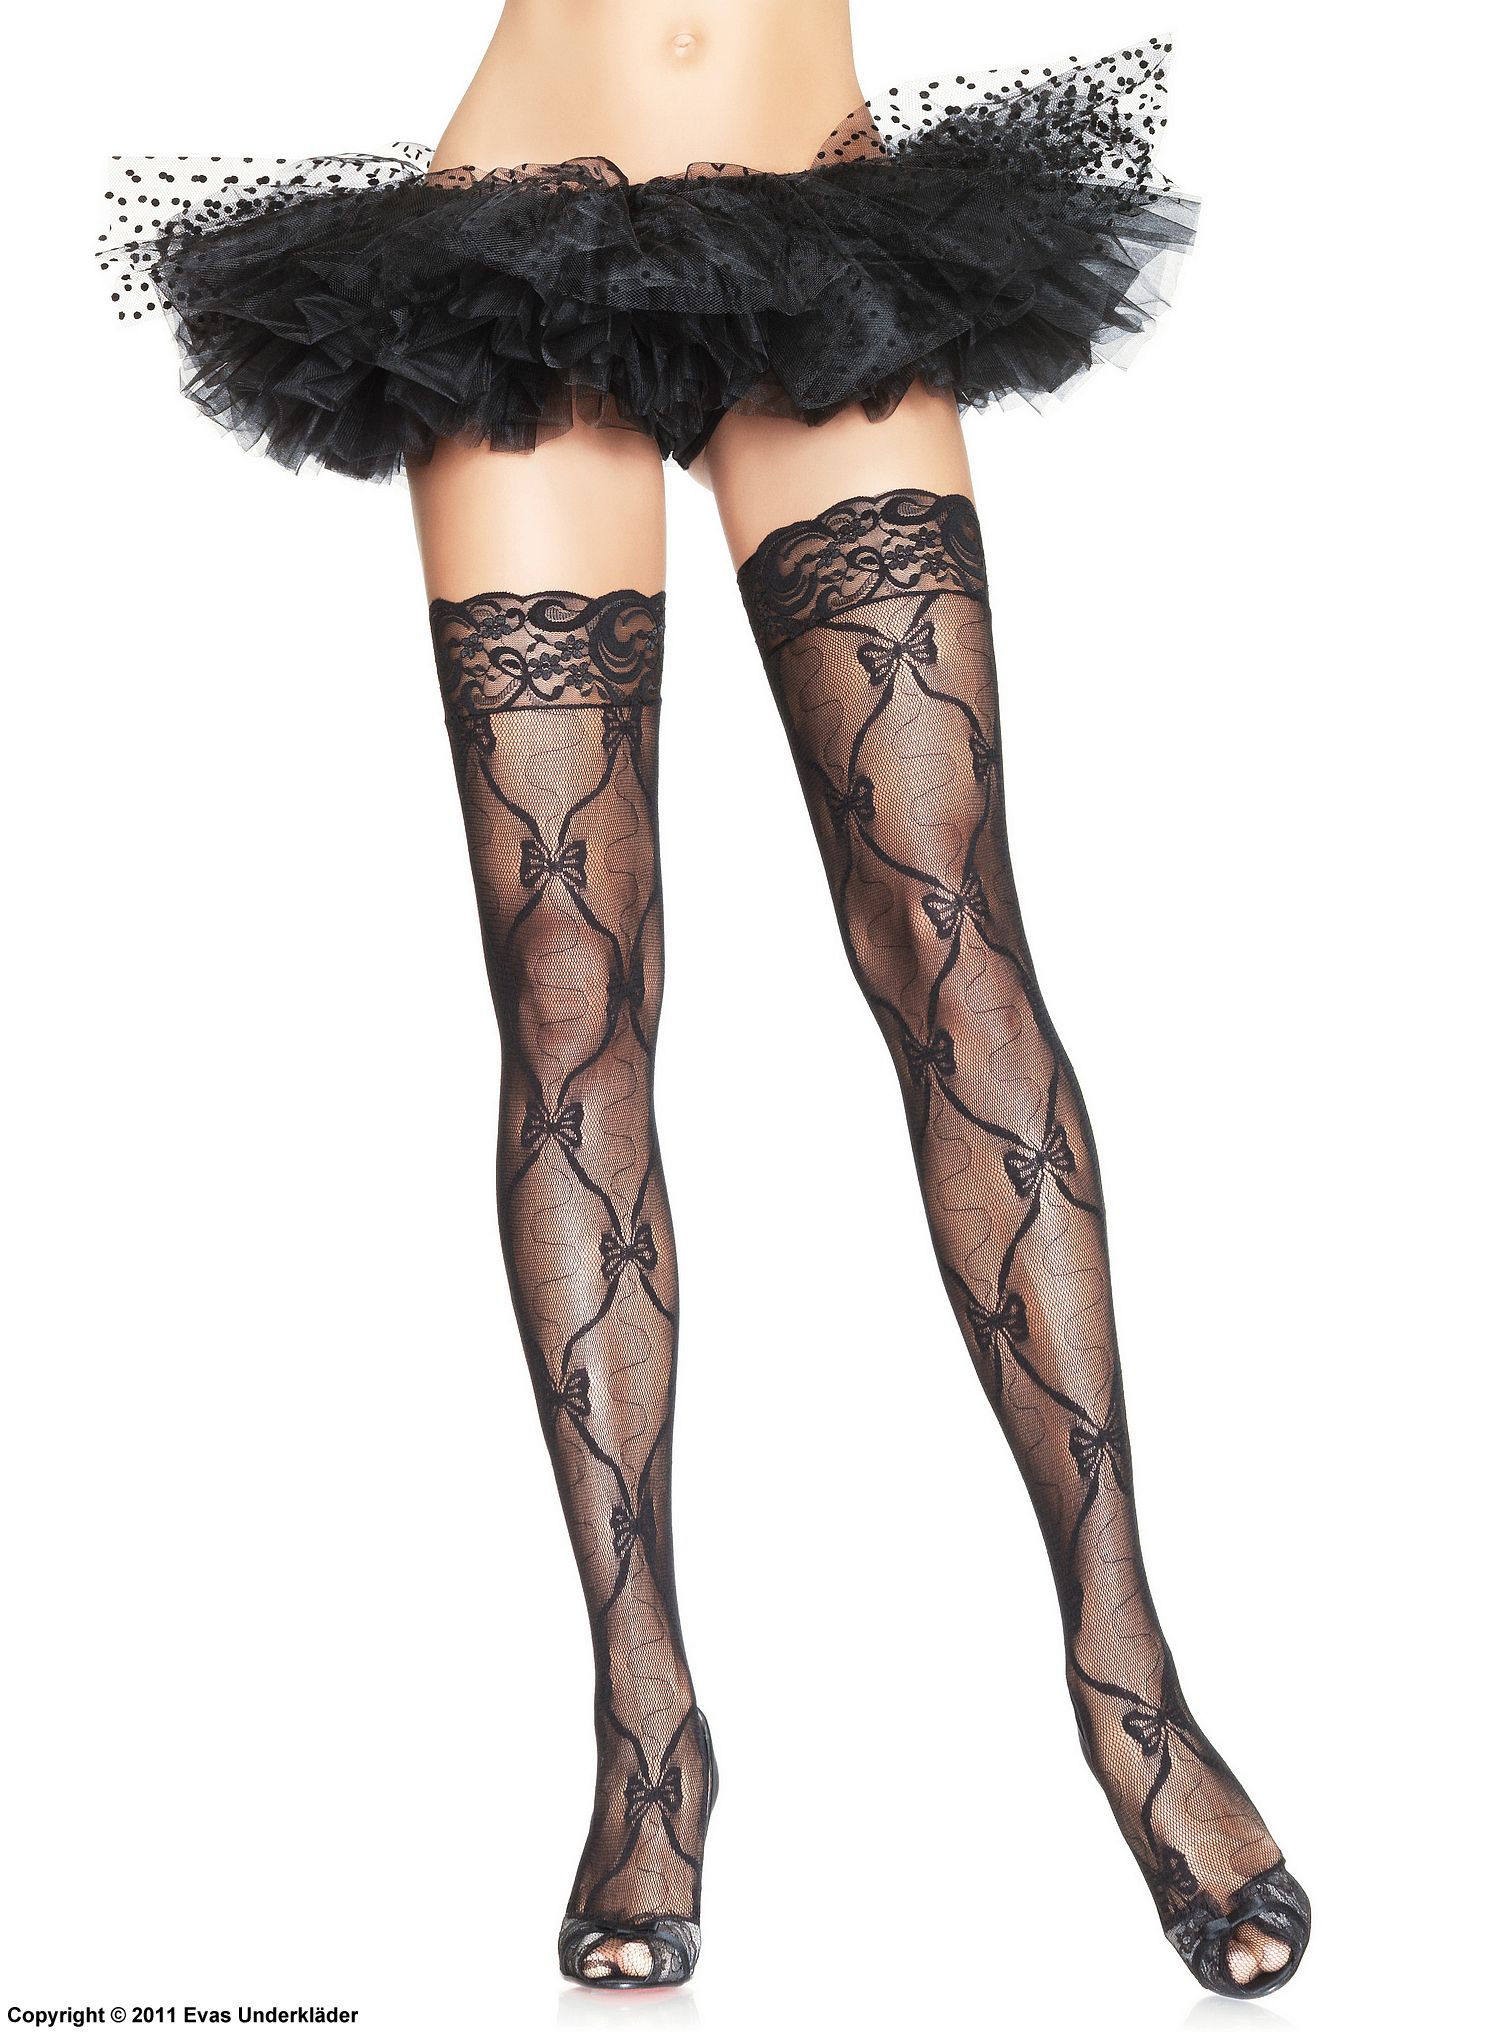 Thigh high stockings with bow patterns